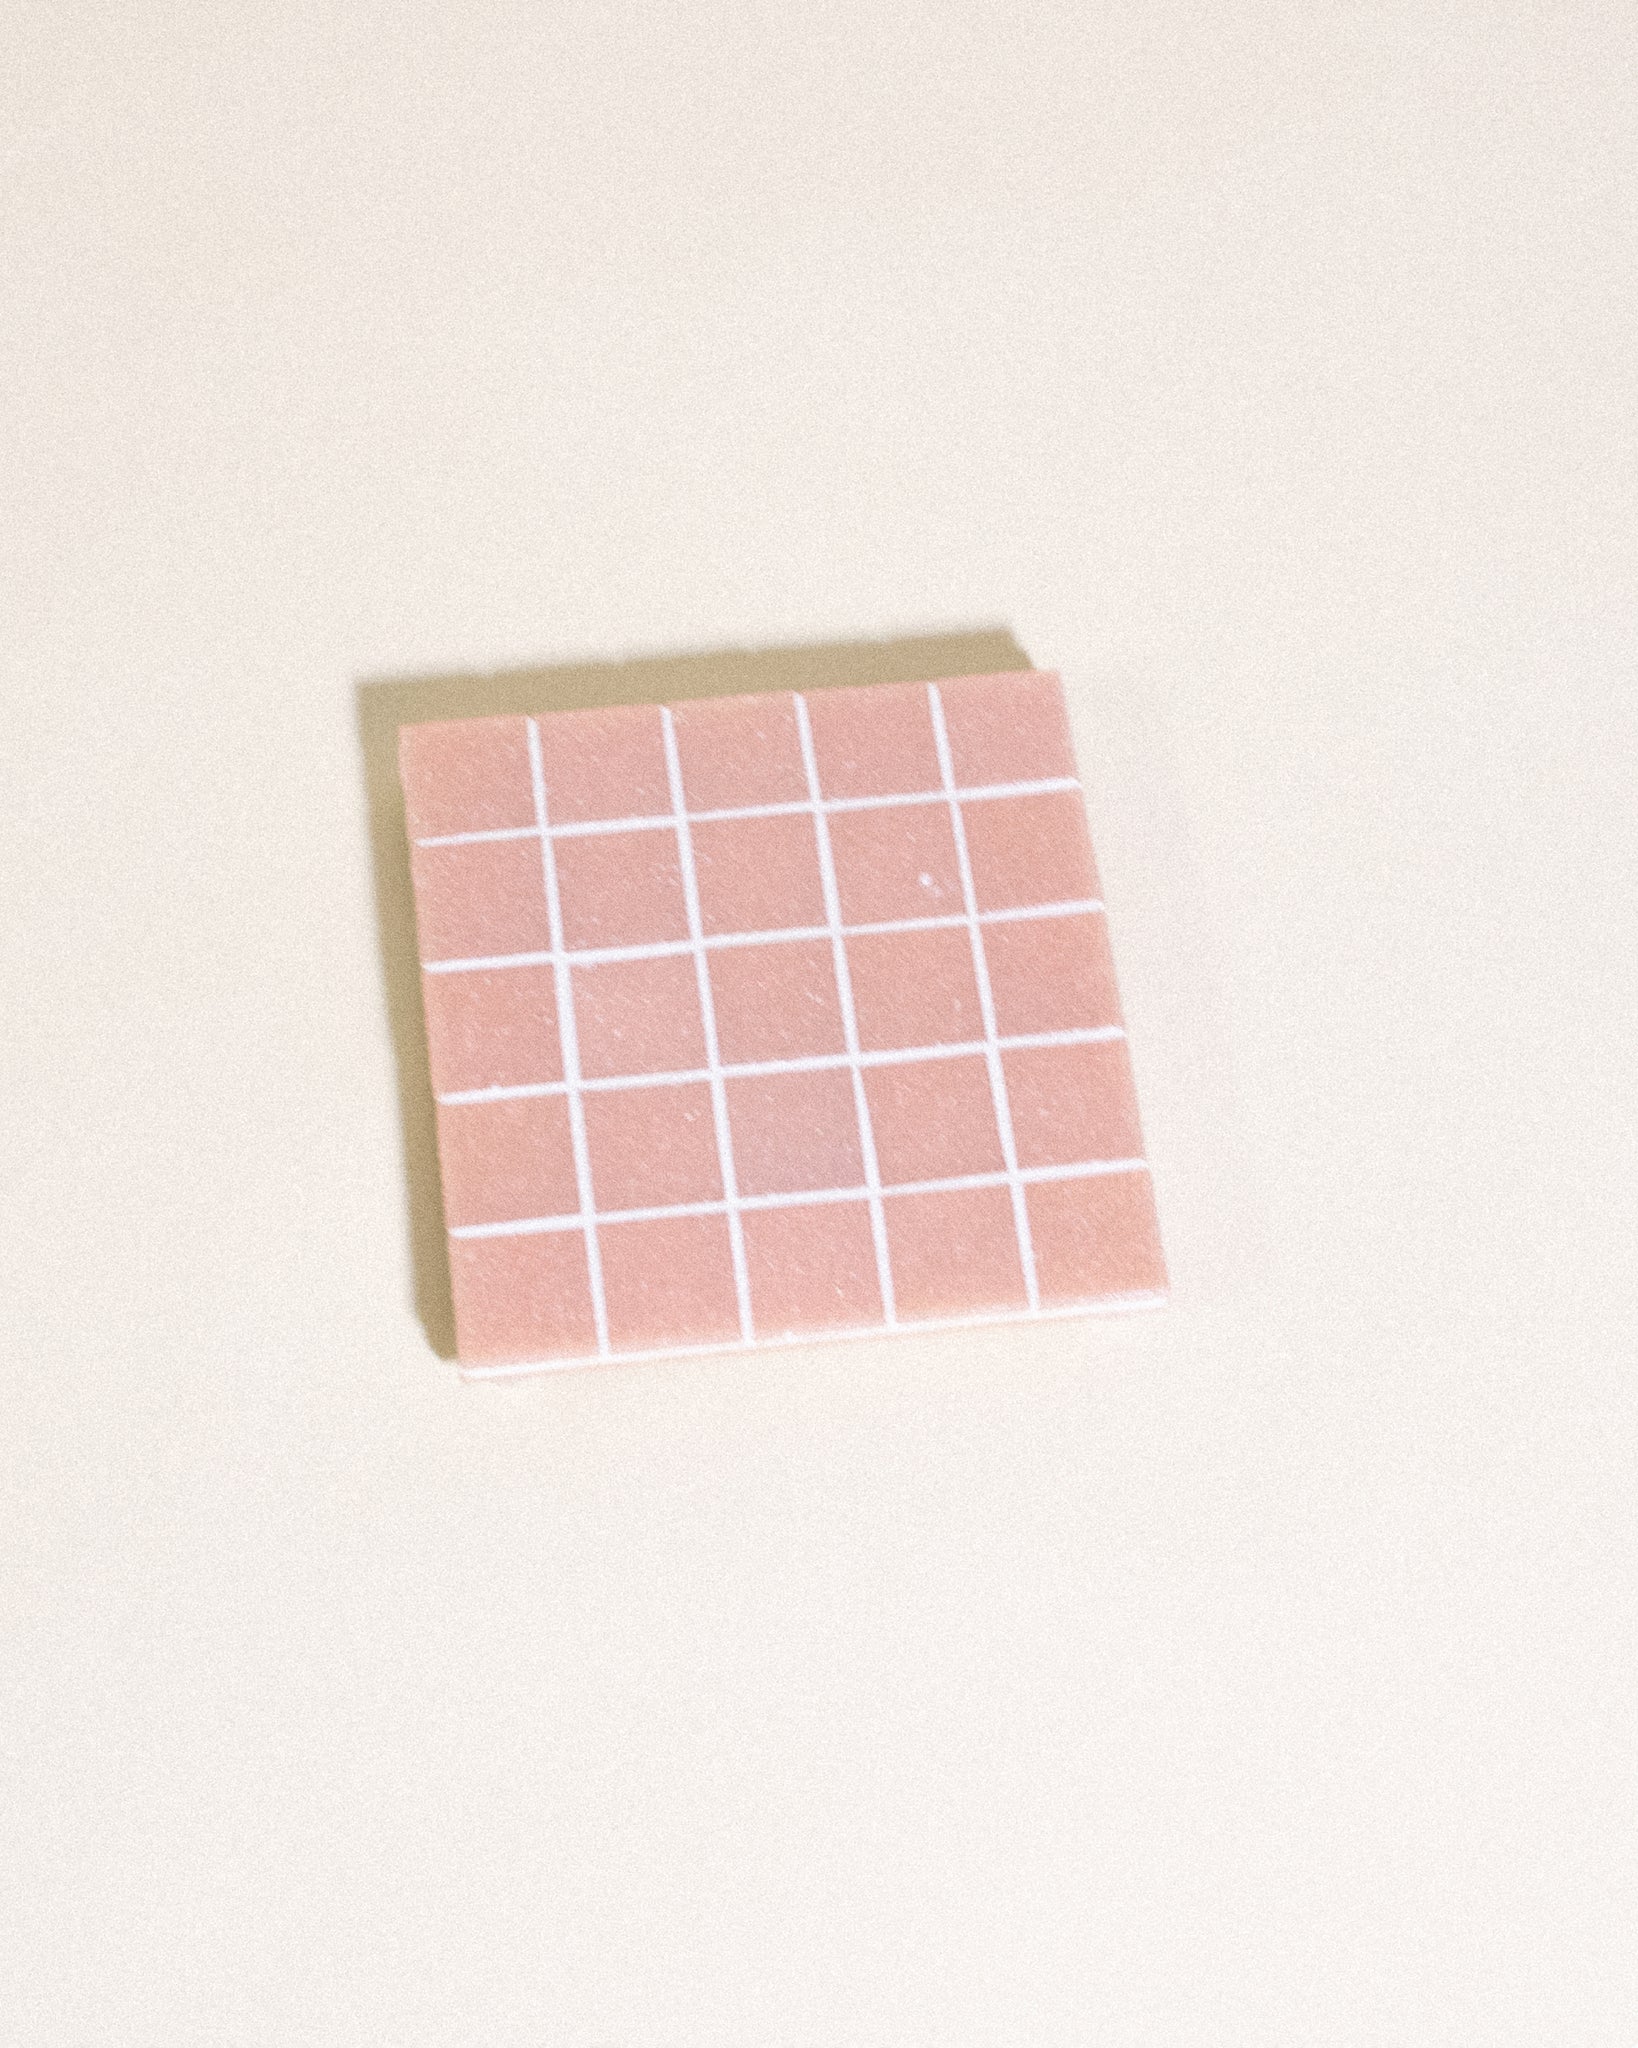 GLASS TILE COASTER - Sour Patch Candy - 01